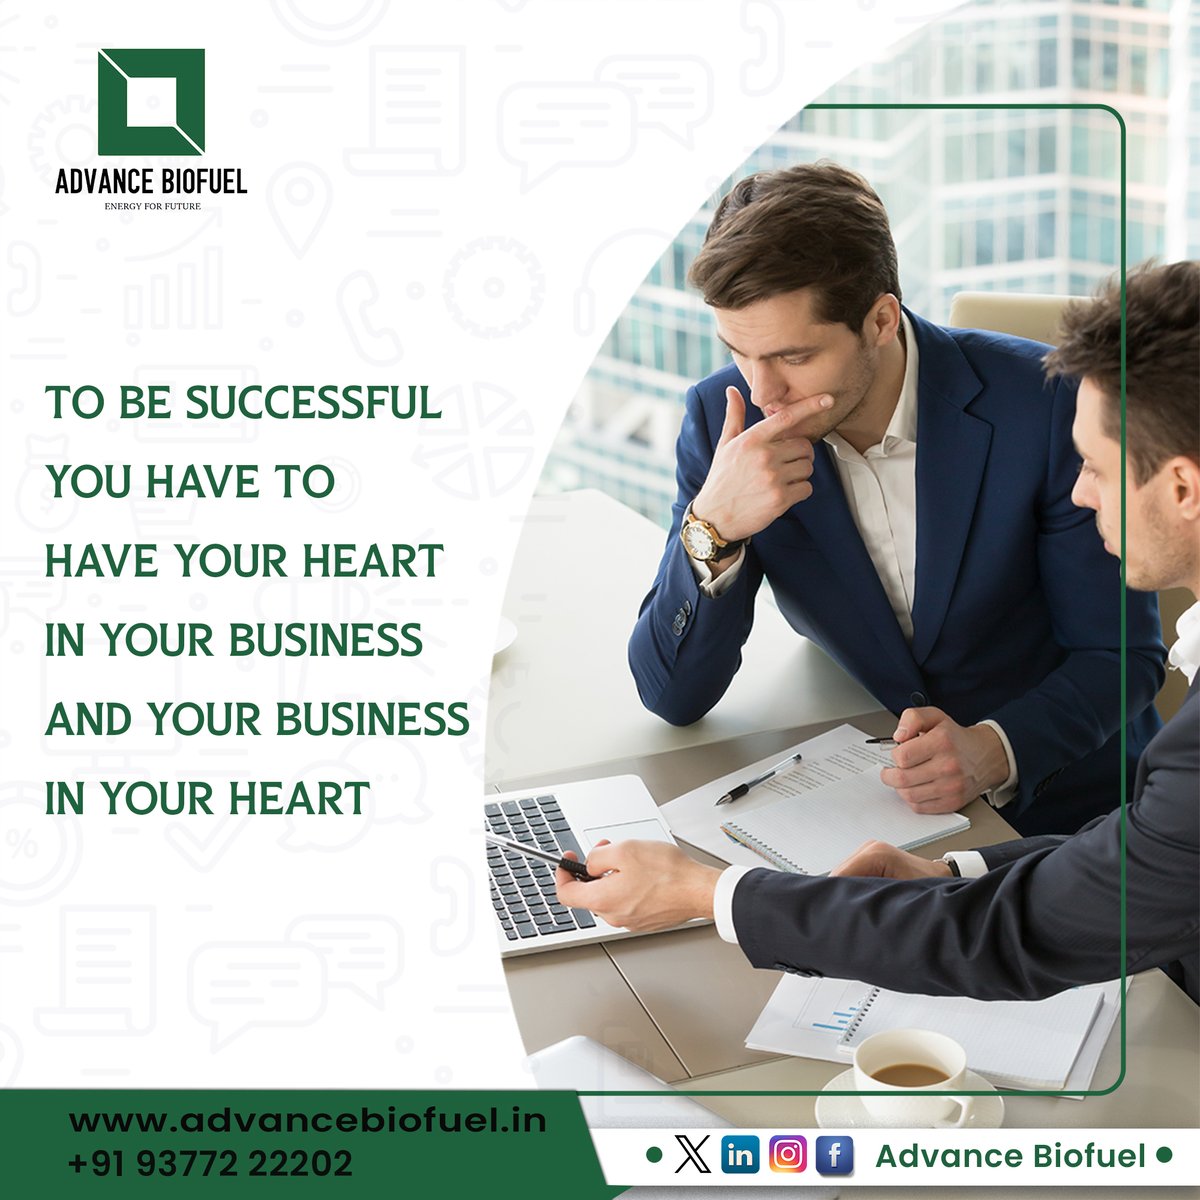 To be successful you have to have your heart in your business and your business in your heart

 #AdvancedBiofuel #SuccessMindset #PassionInBusiness #HeartAndBusiness #BusinessSuccess #DrivenByPassion #HeartfeltSuccess #BusinessDevotion #quote #weekend